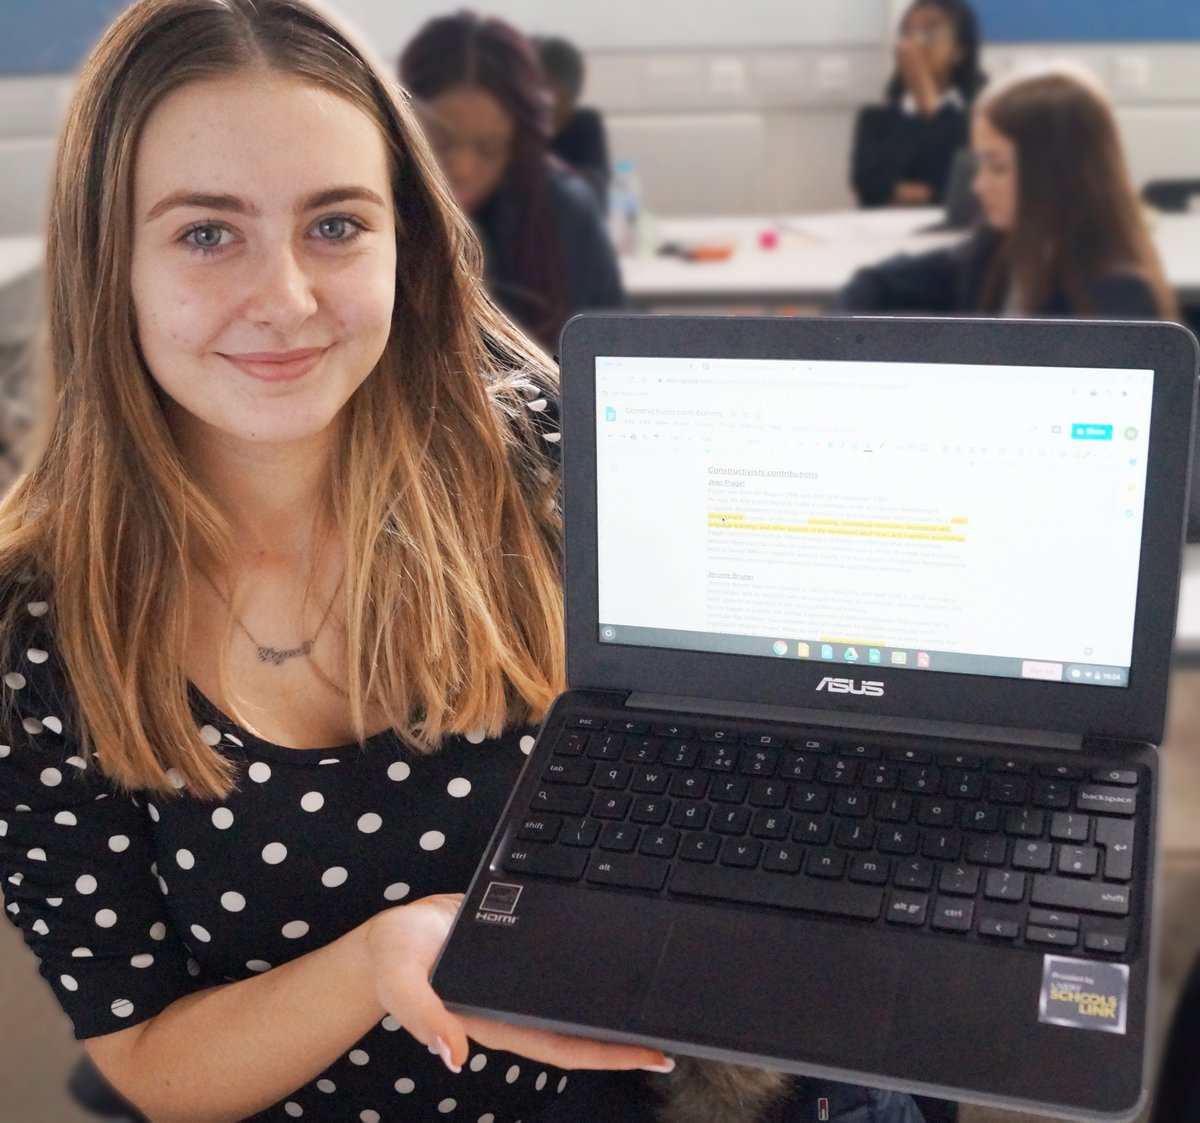 Amazing - 1 person just rang up and is donating £25,000 to our Digital Divide Fund to buy more devices and connections for disadvantaged students being left behind. Radical generosity! Find out more here if you would also like to get involved - virginmoneygiving.com/fund/the-digit…